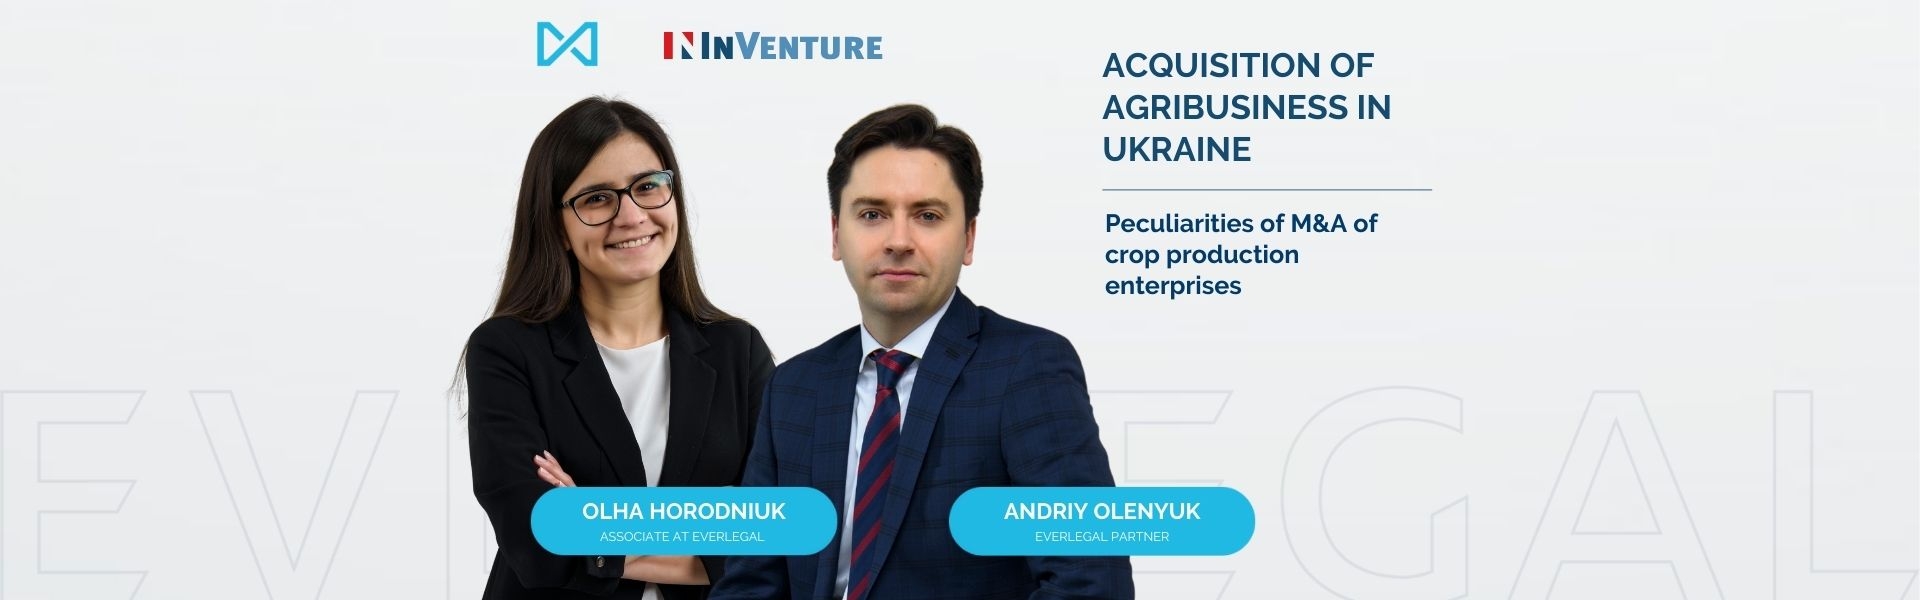 Acquisition of agribusiness in Ukraine: peculiarities of M&A of crop production enterprises